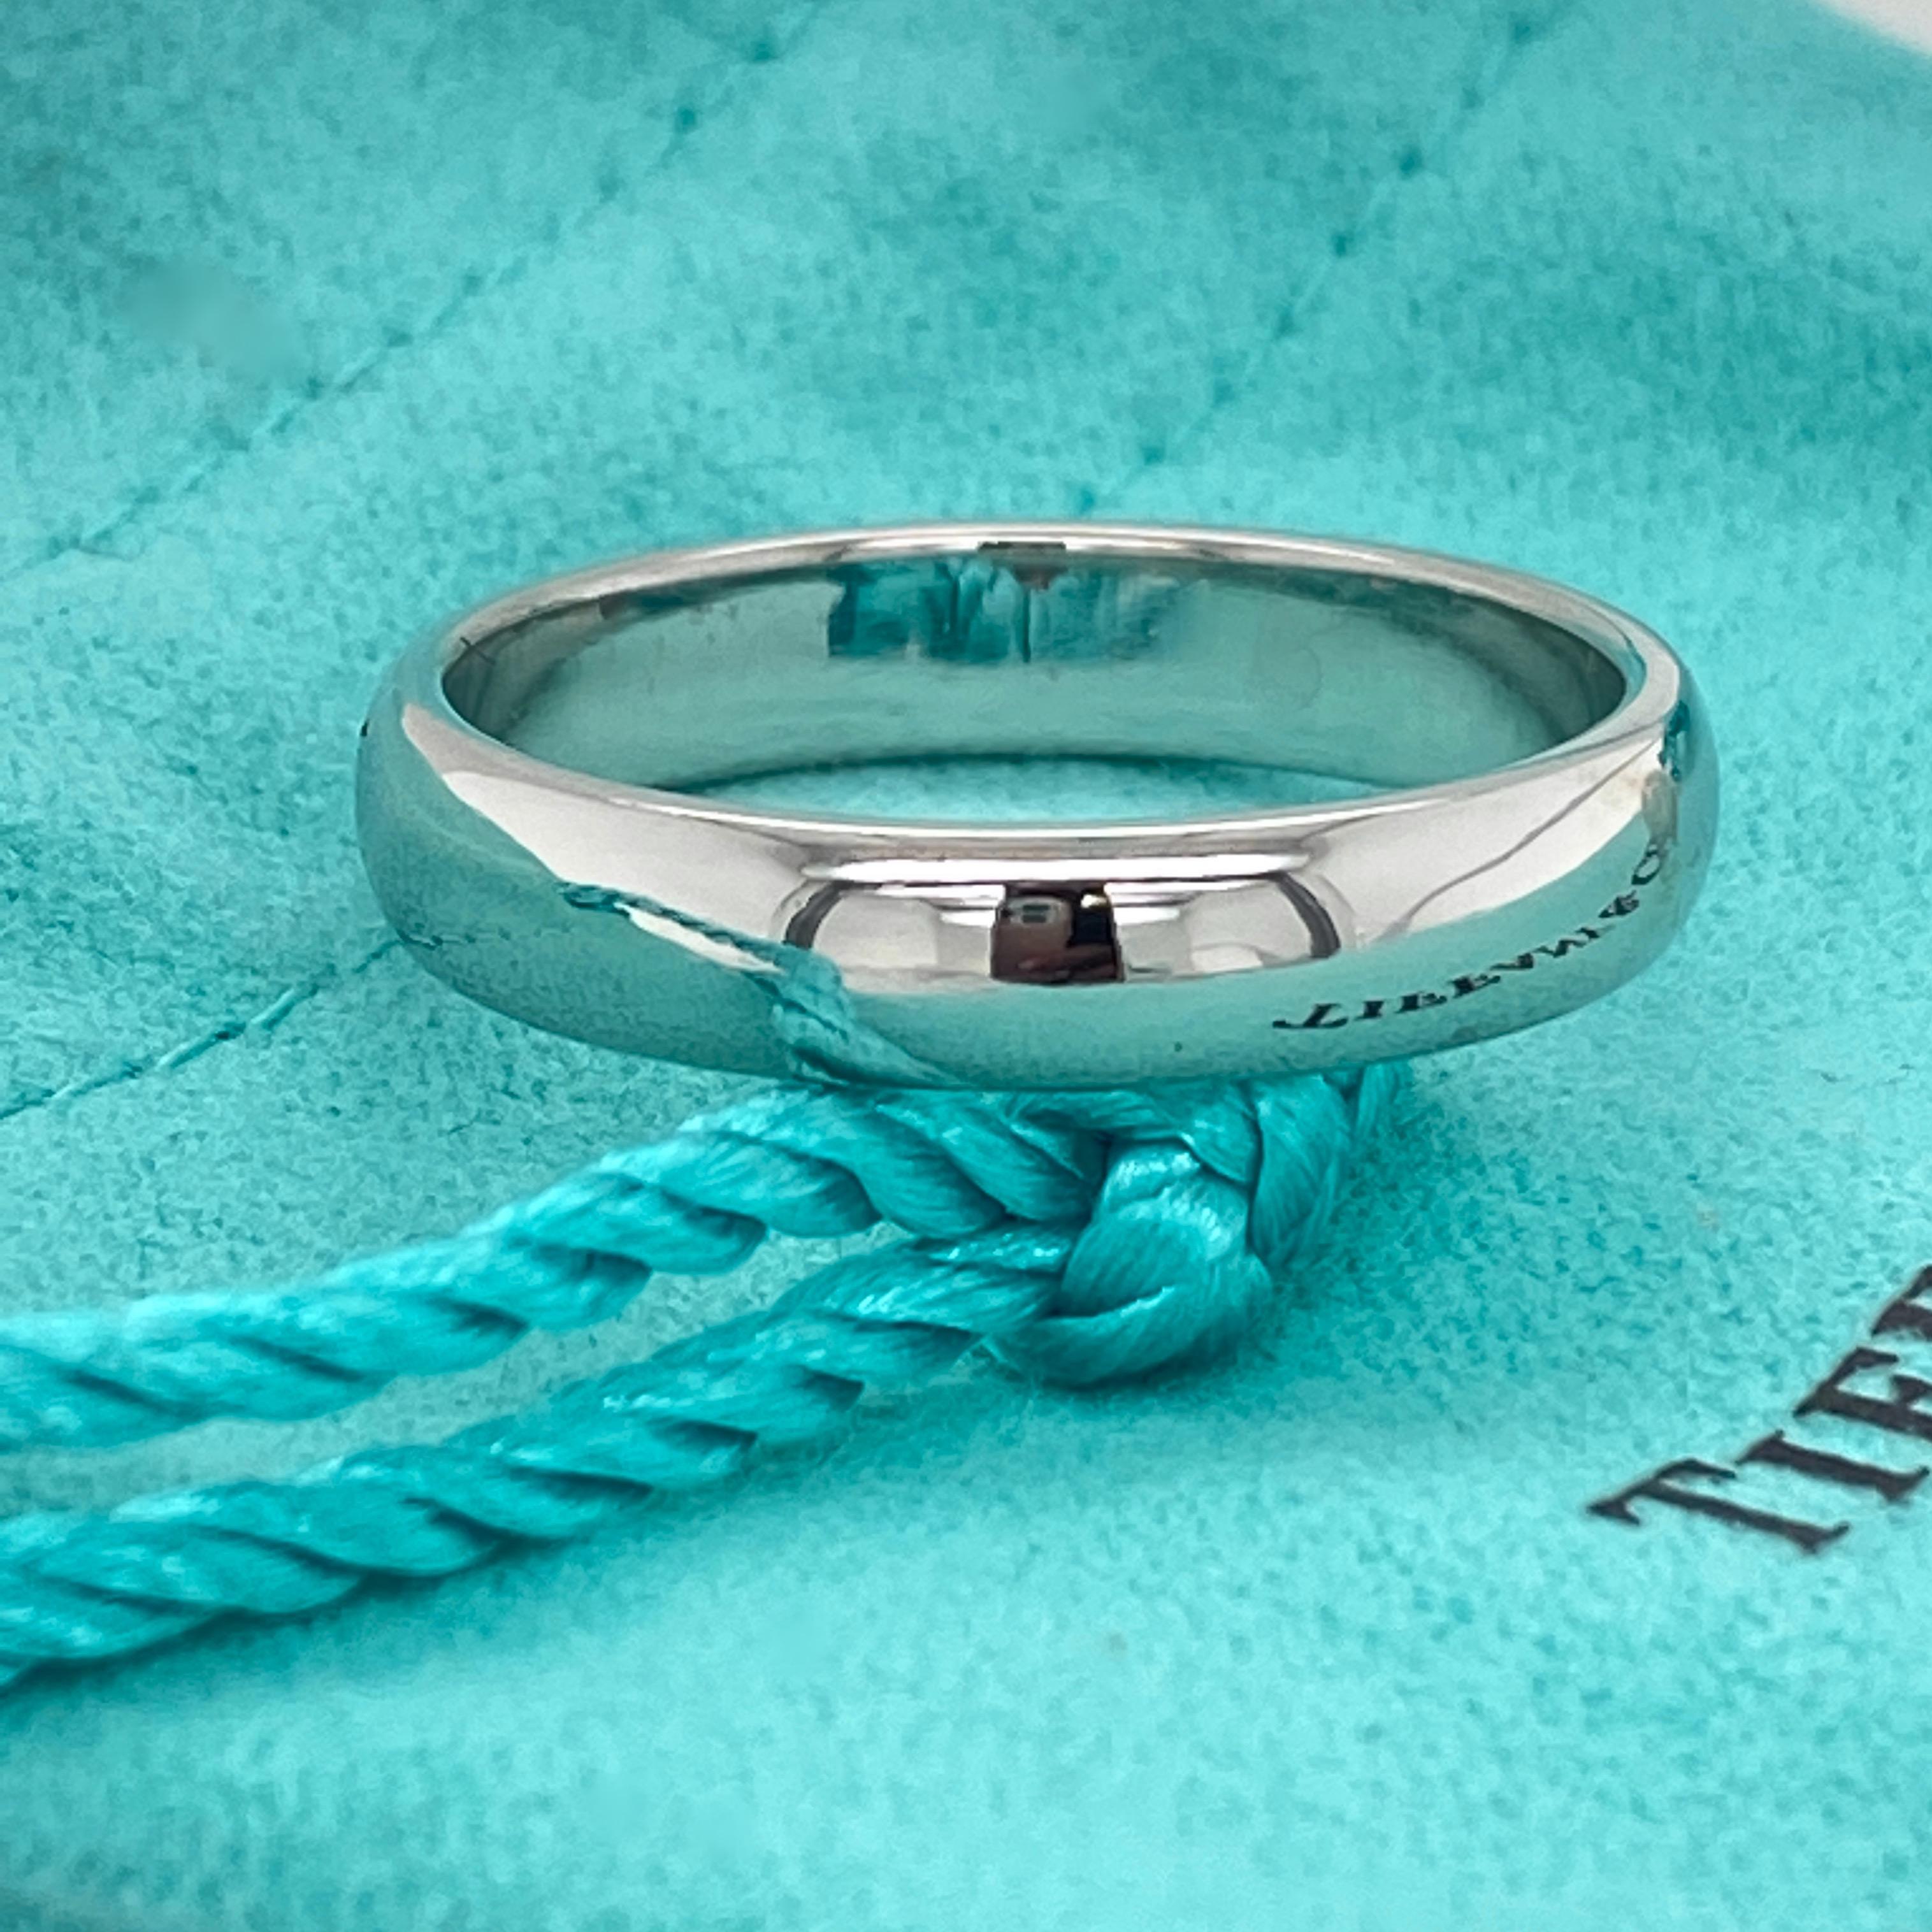 TIFFANY & CO.
Style:  Classic Wedding Band Ring
Size:  10.5 sizabe
Metal:  Platinum
Hallmark:  ©TIFFANY&CO. PT950
Includes:  T&C Pouch
Retail:  $1,950

Sku#11050TMT022920-10.5SZ